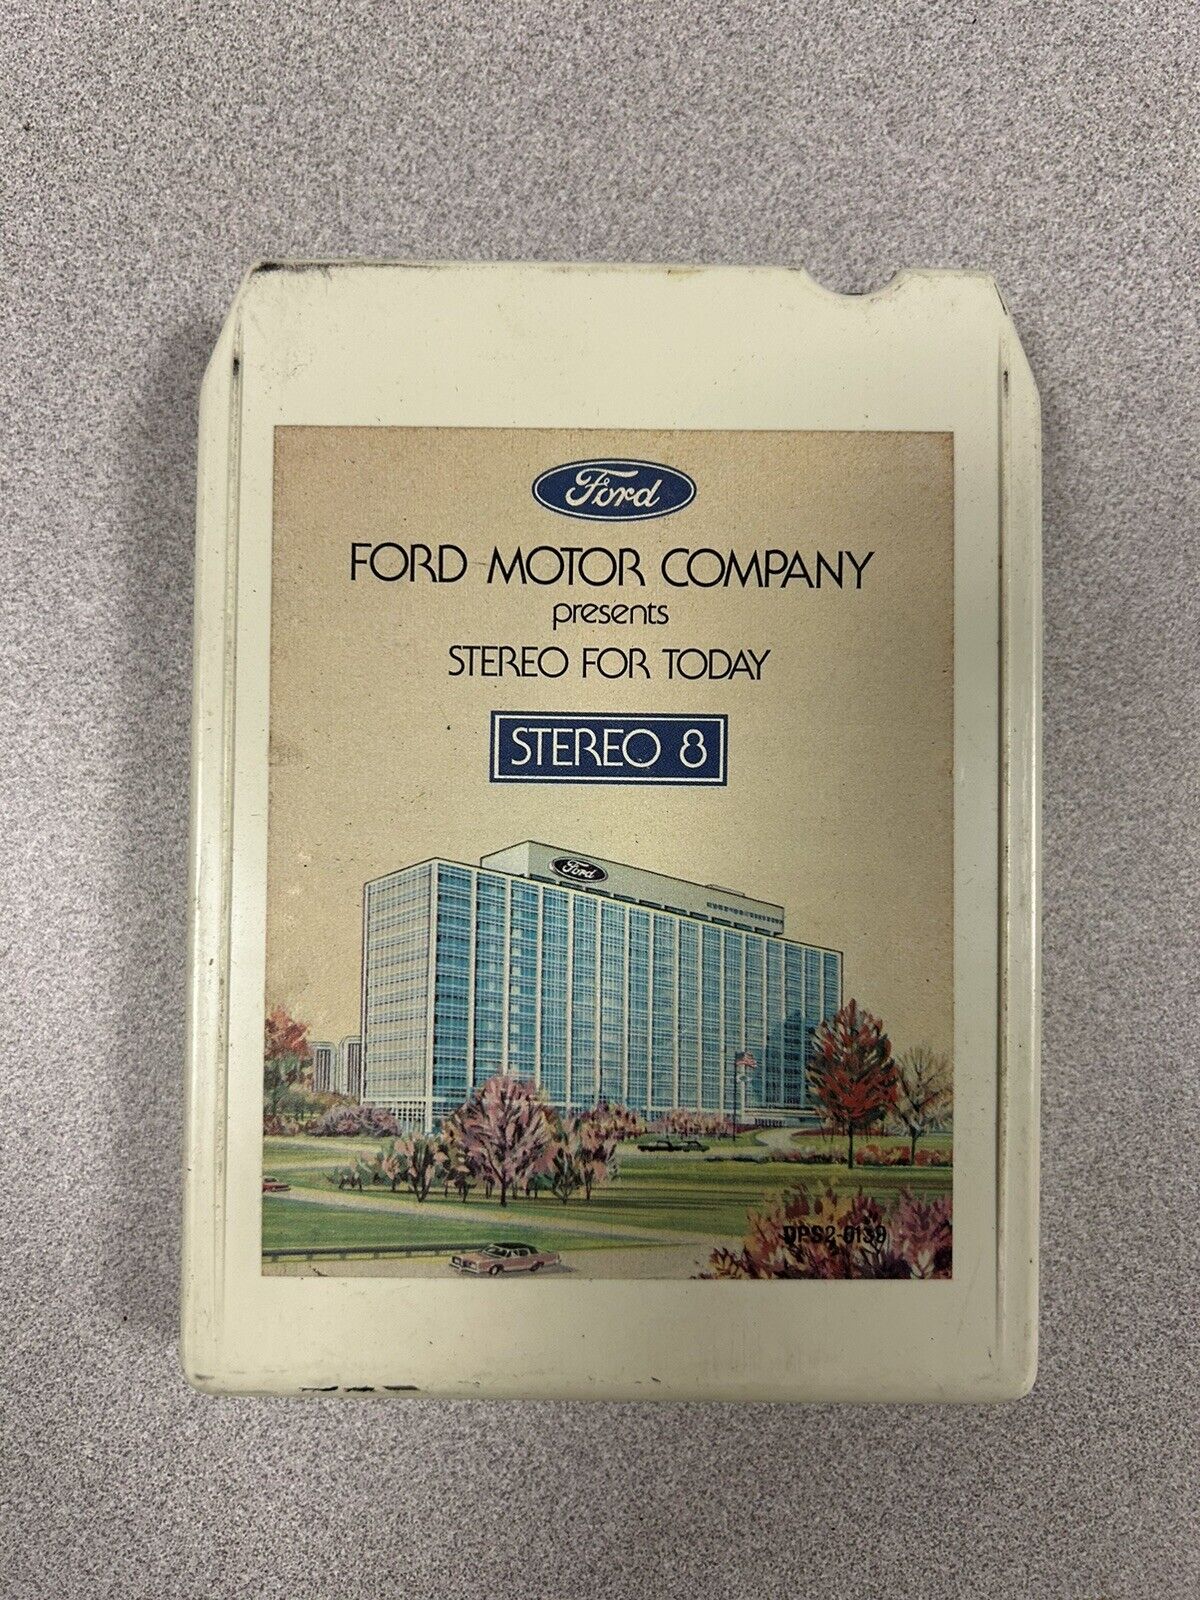 1975 Ford Motor Company Stereo For Today Stero 8 Track RCA Tested, Works